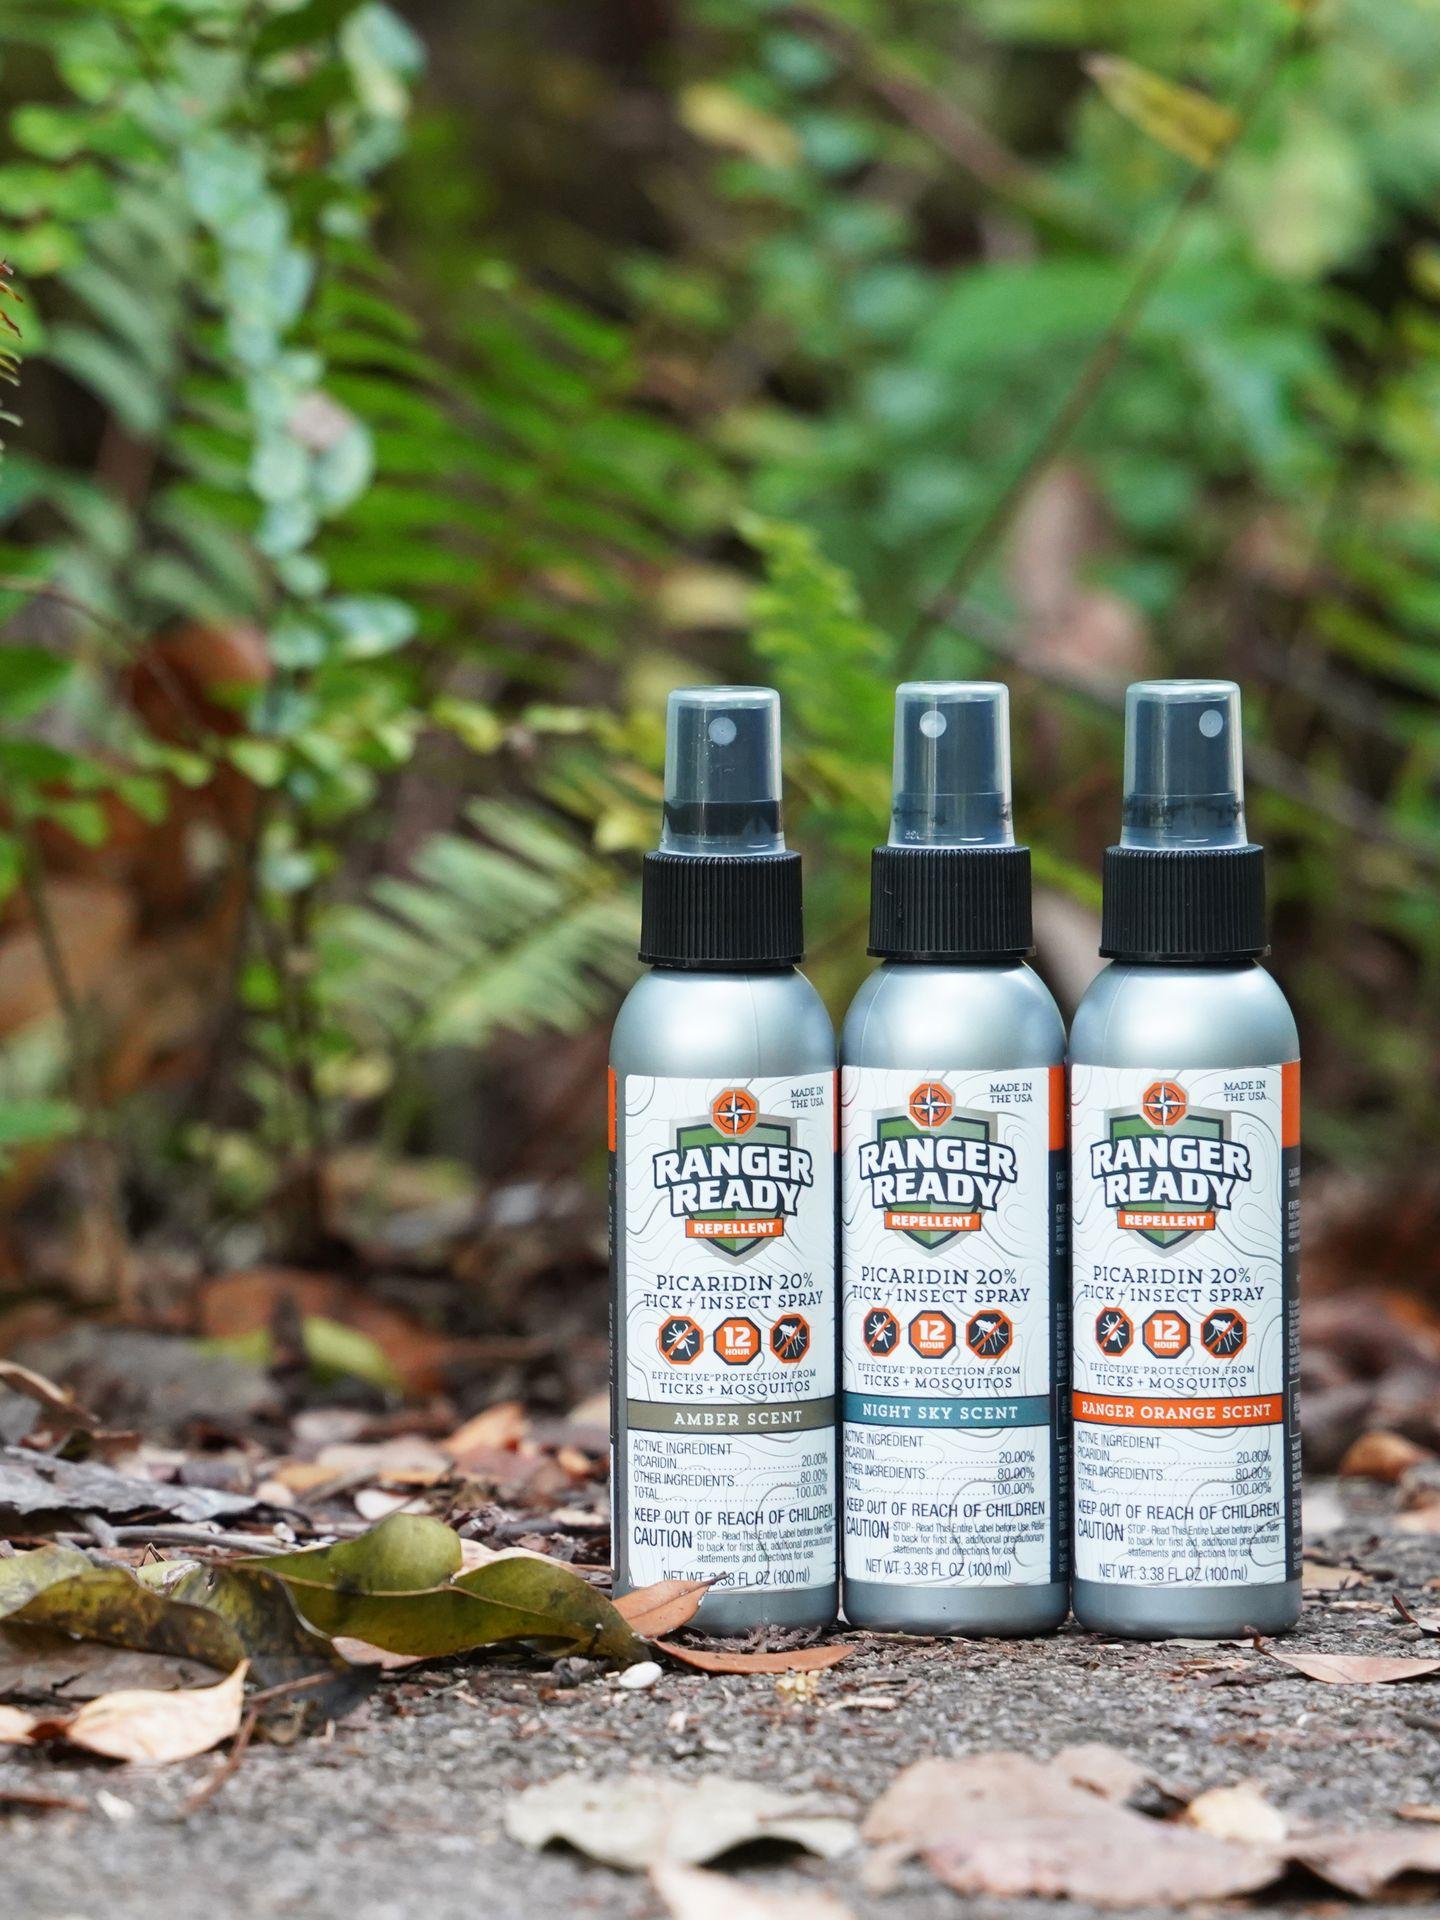 Three bottles of Ranger Ready insect repellent